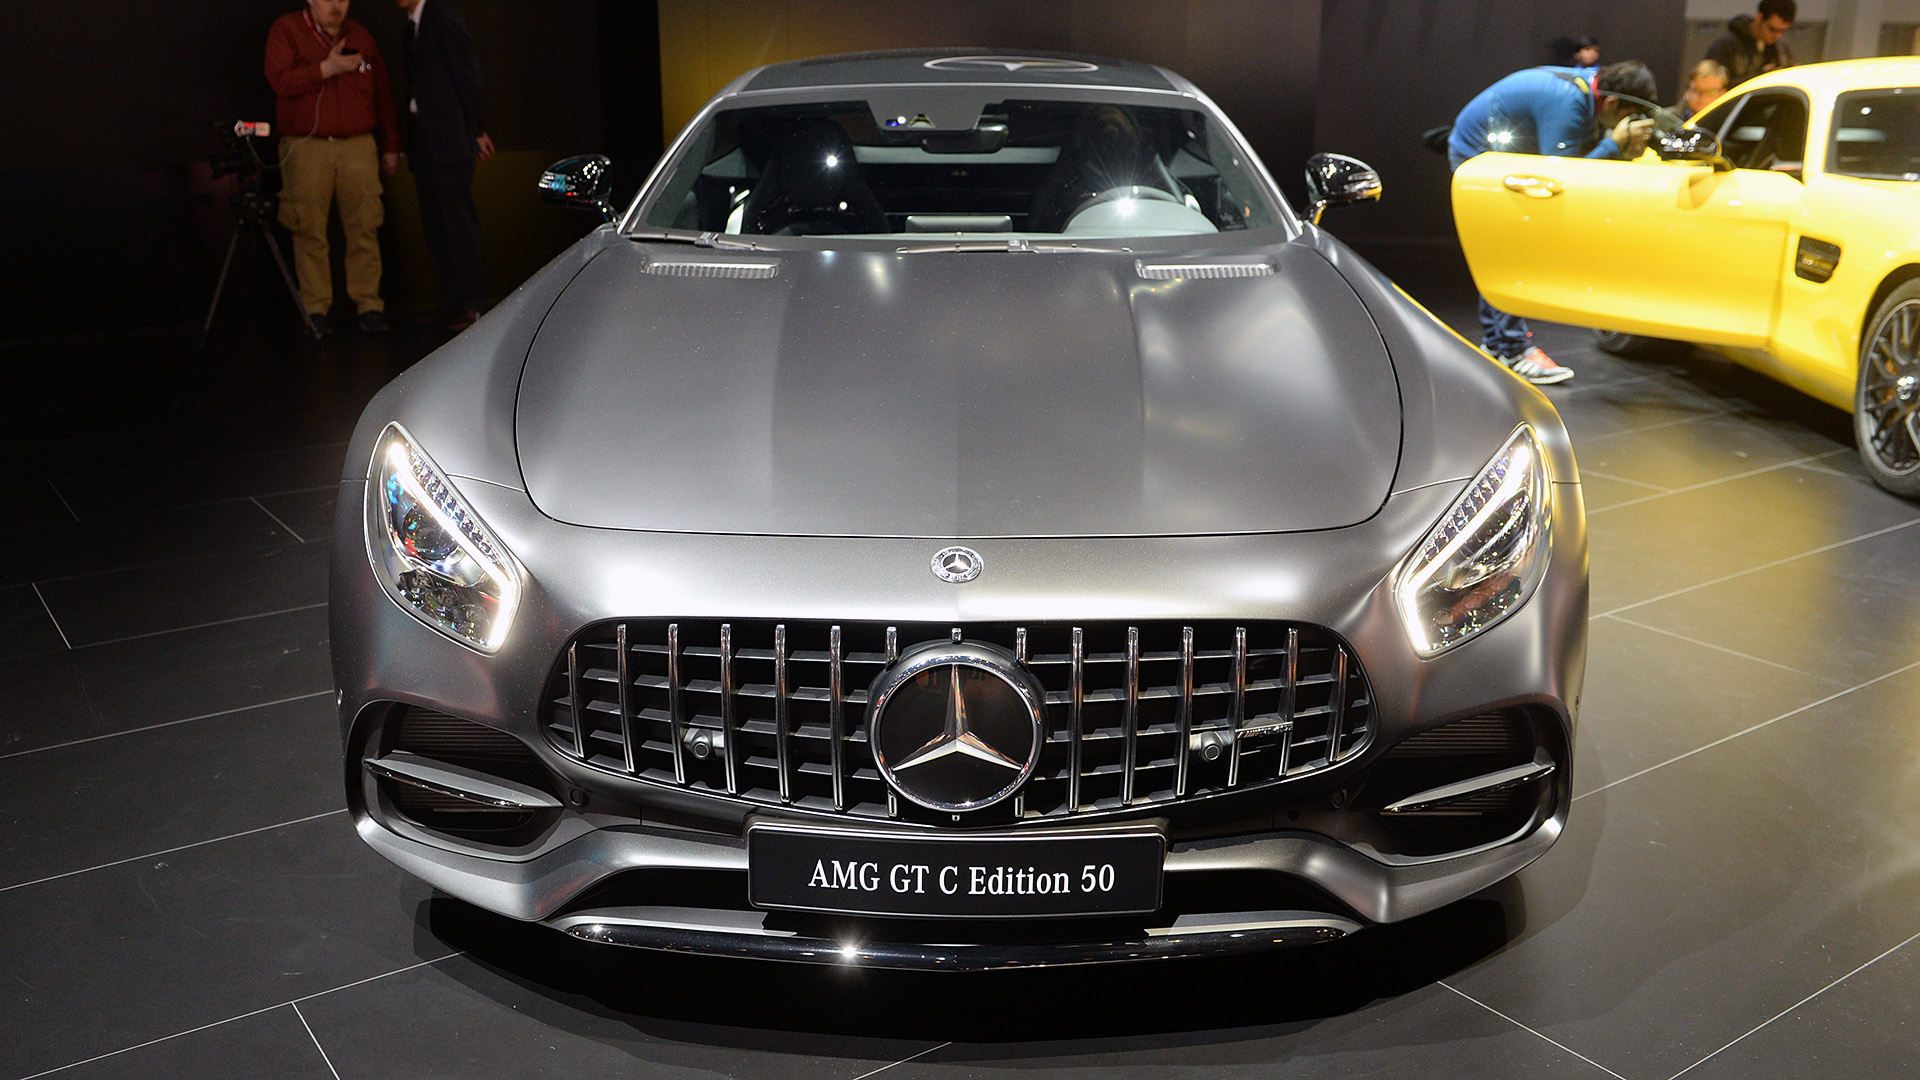 Mercedes-AMG GT C Coupe at Front